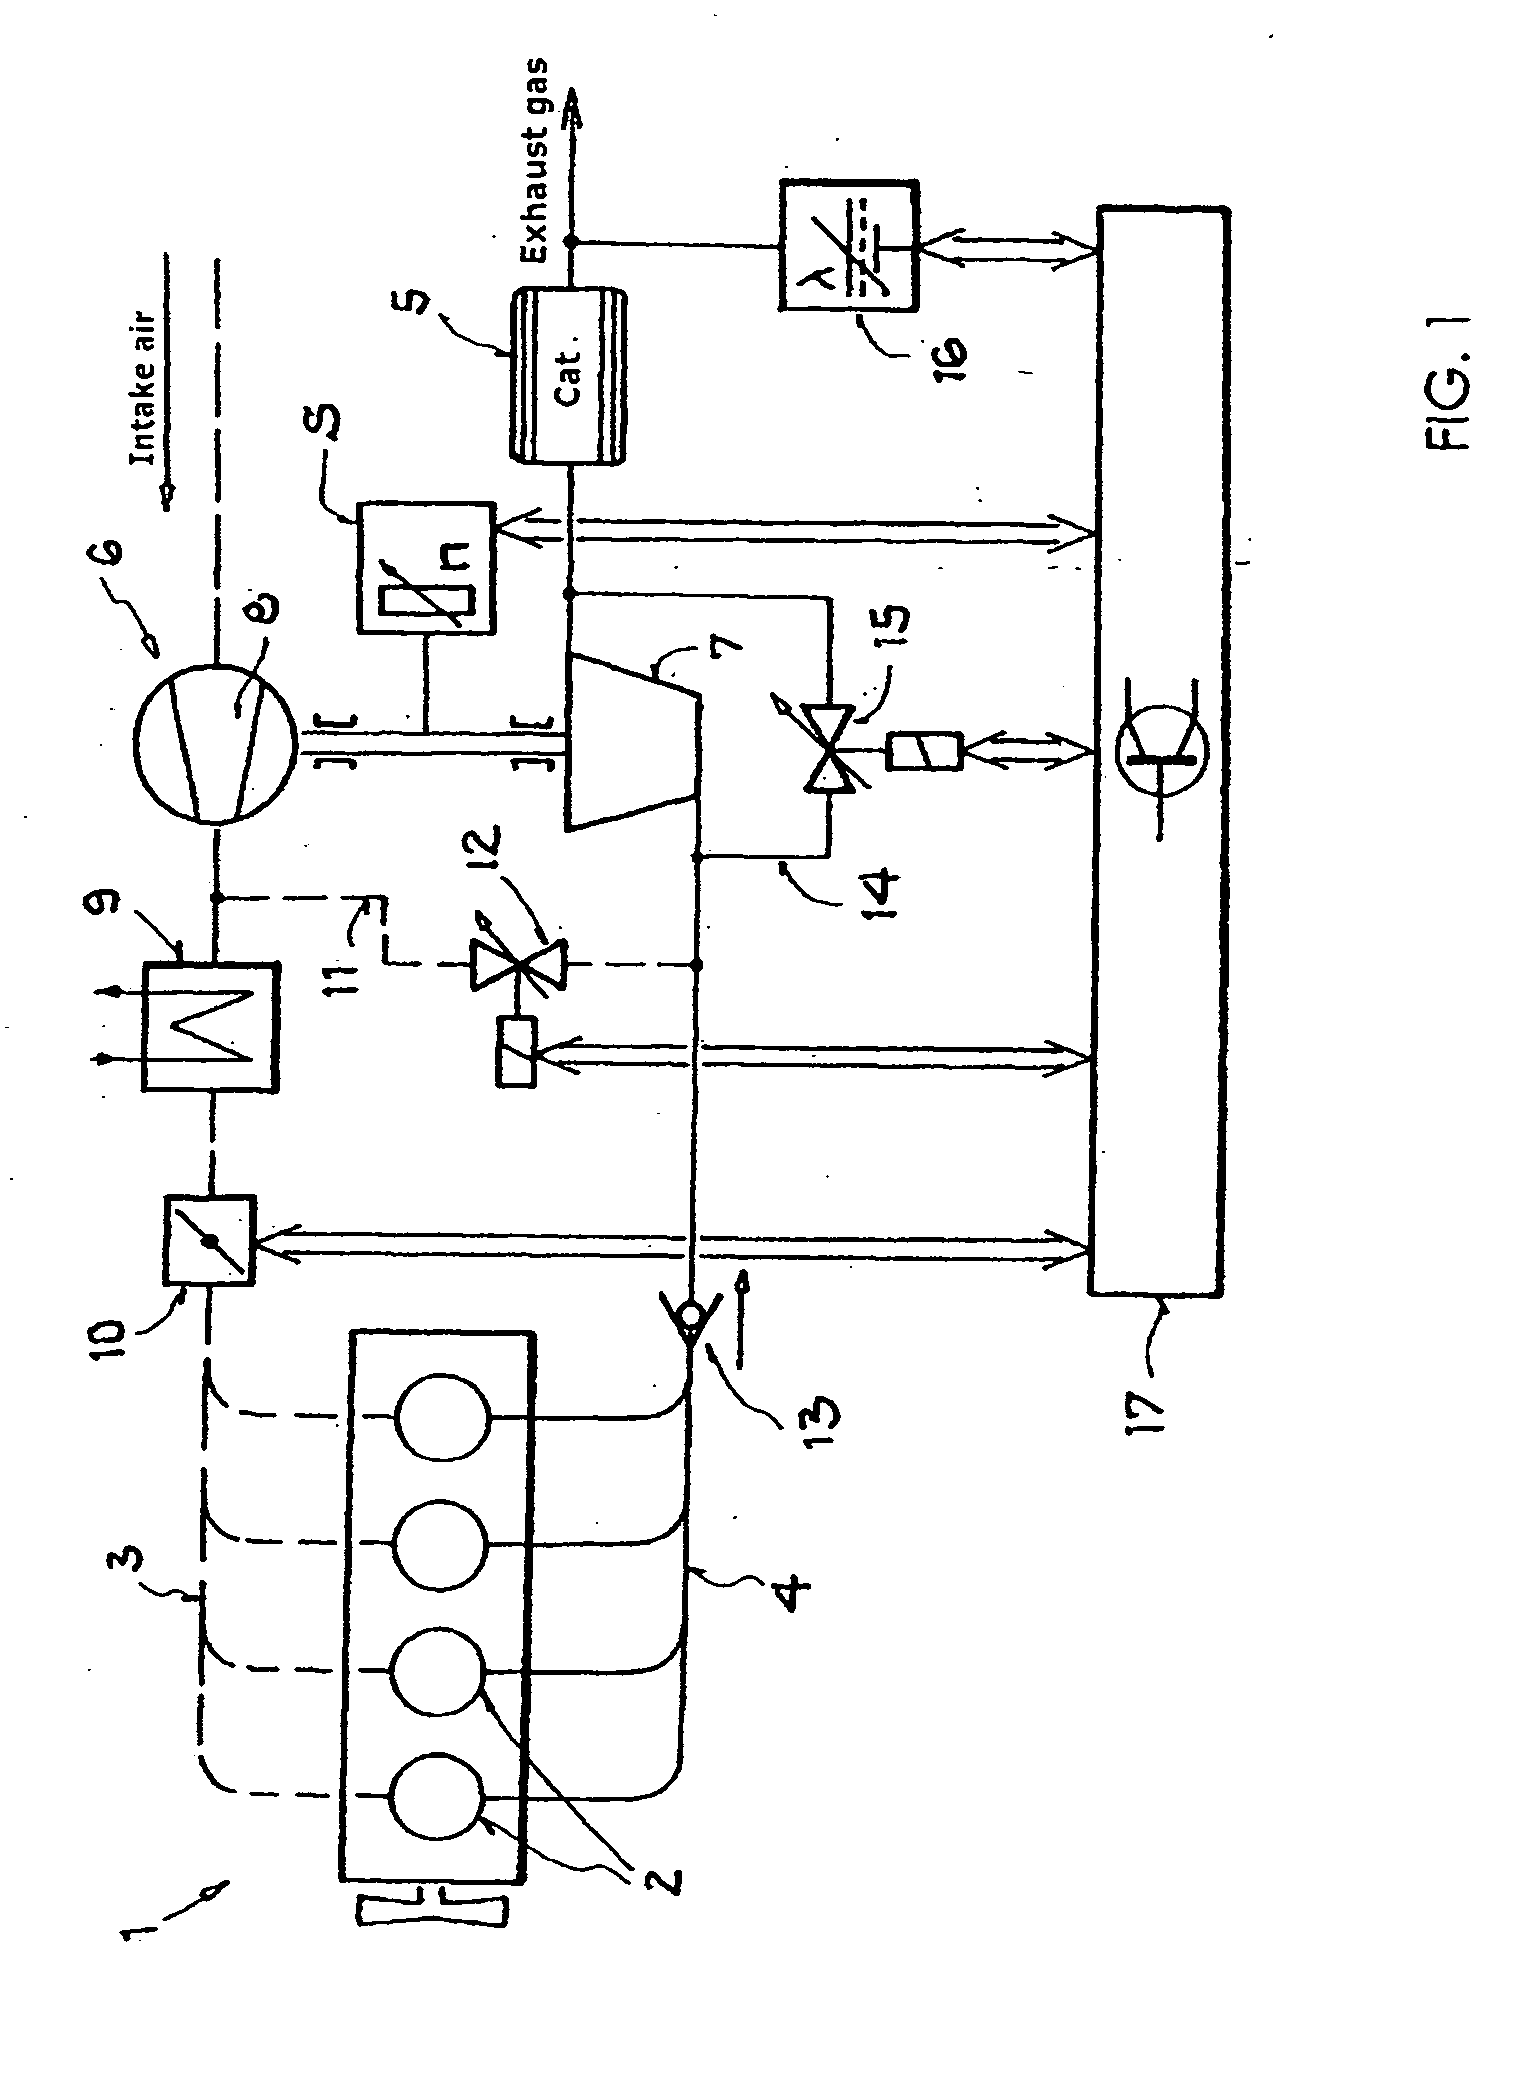 Internal combustion engine with exhaust-gas turbocharger and secondary air injection